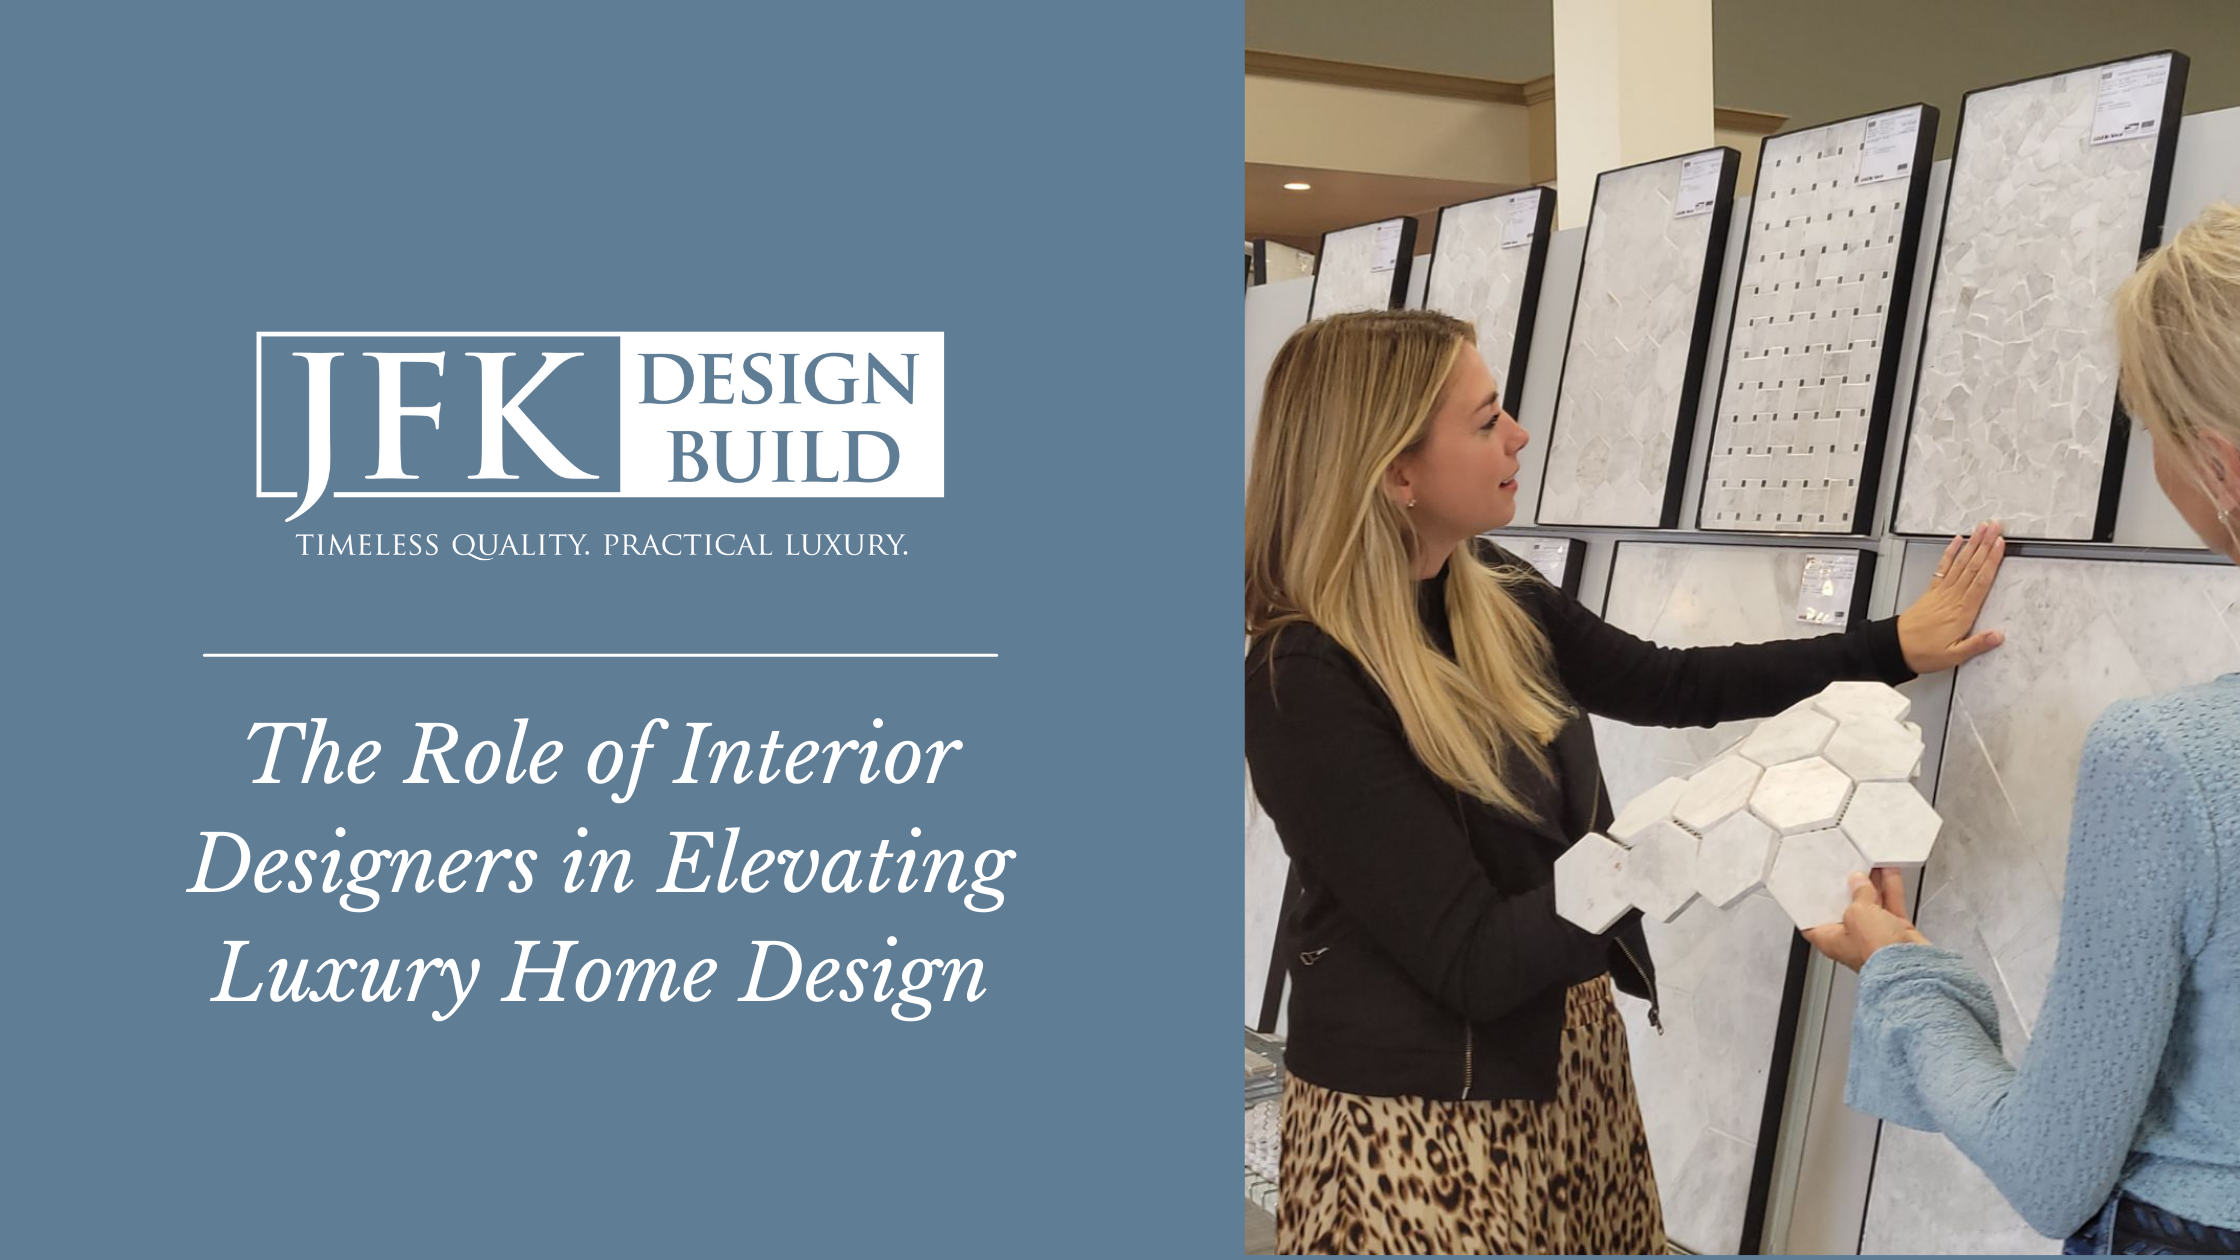 A photo of Jackie, a luxury home designer, next to a blue block with white text "The Role of Interior Designers in Elevating Luxury Home Design" and a white JFK Design Build logo